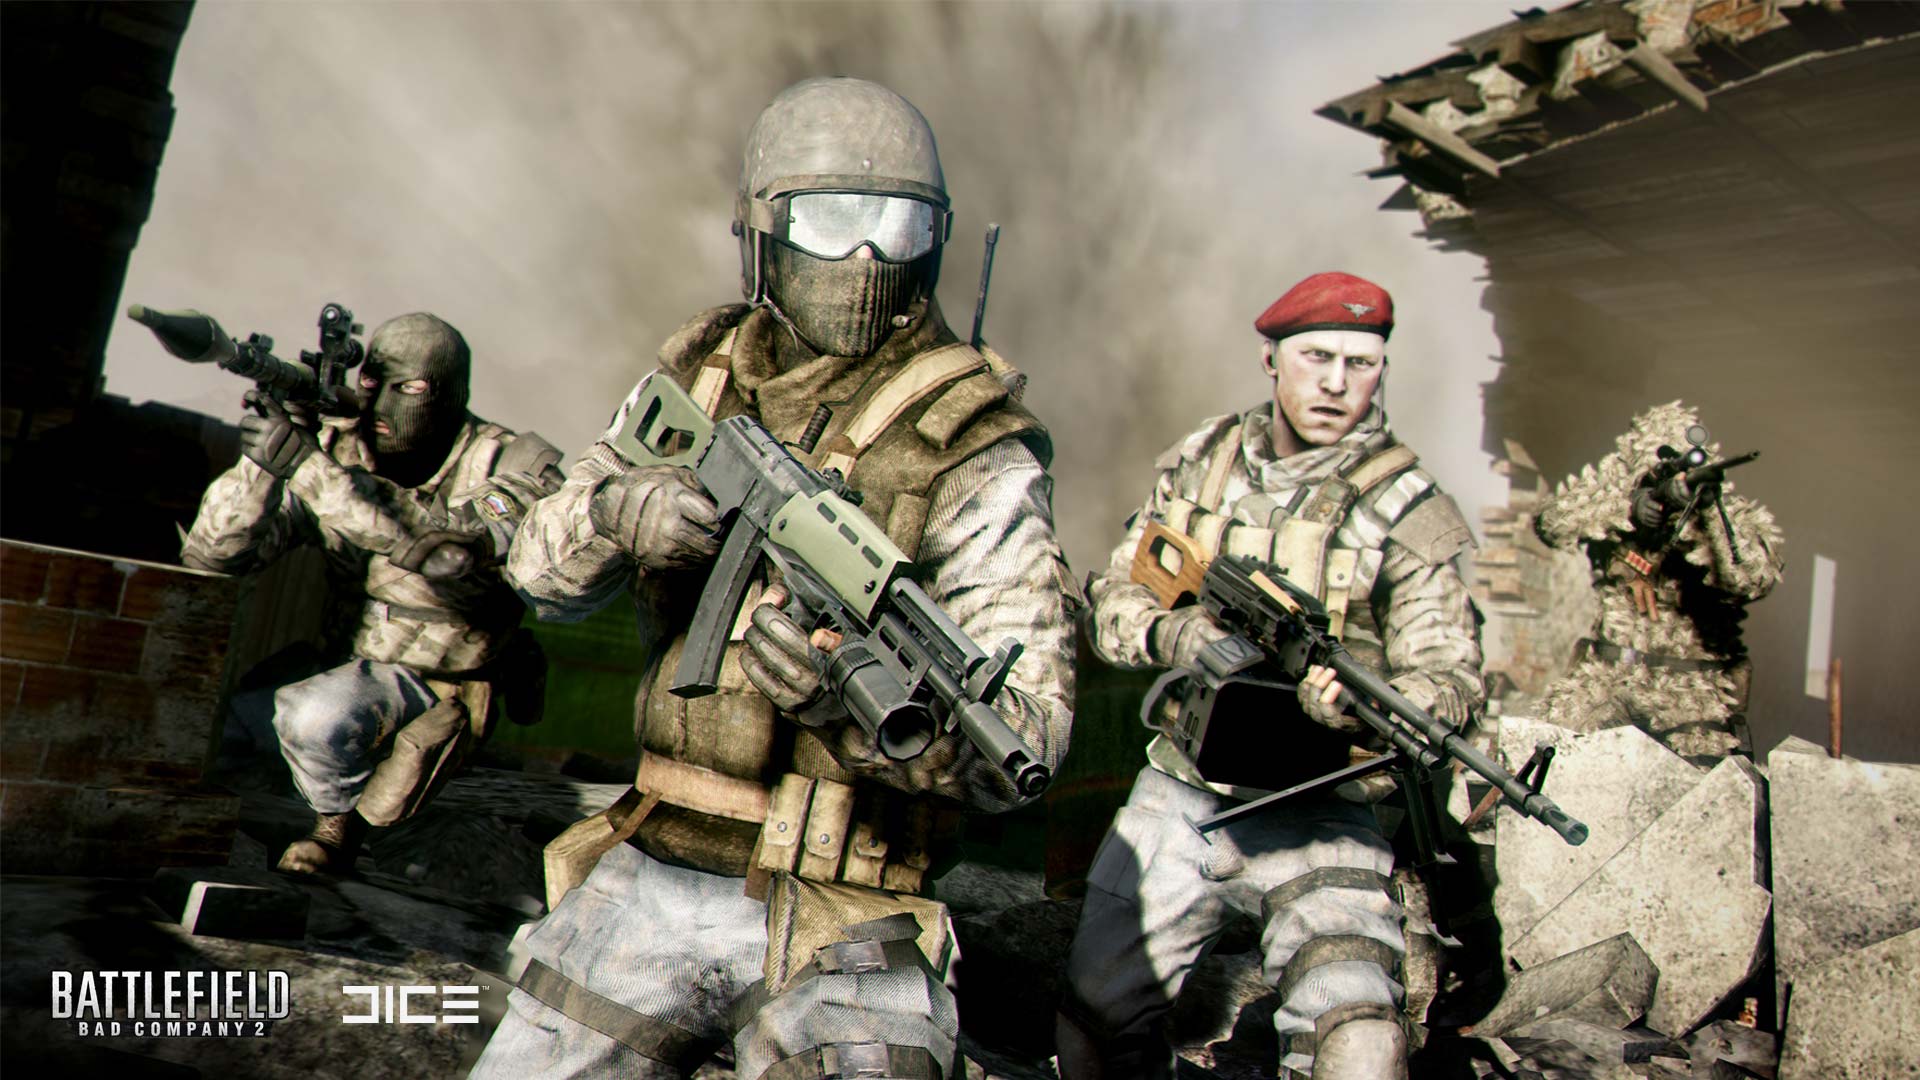 Left to right: Engineer, Assault, Medic, Recon.